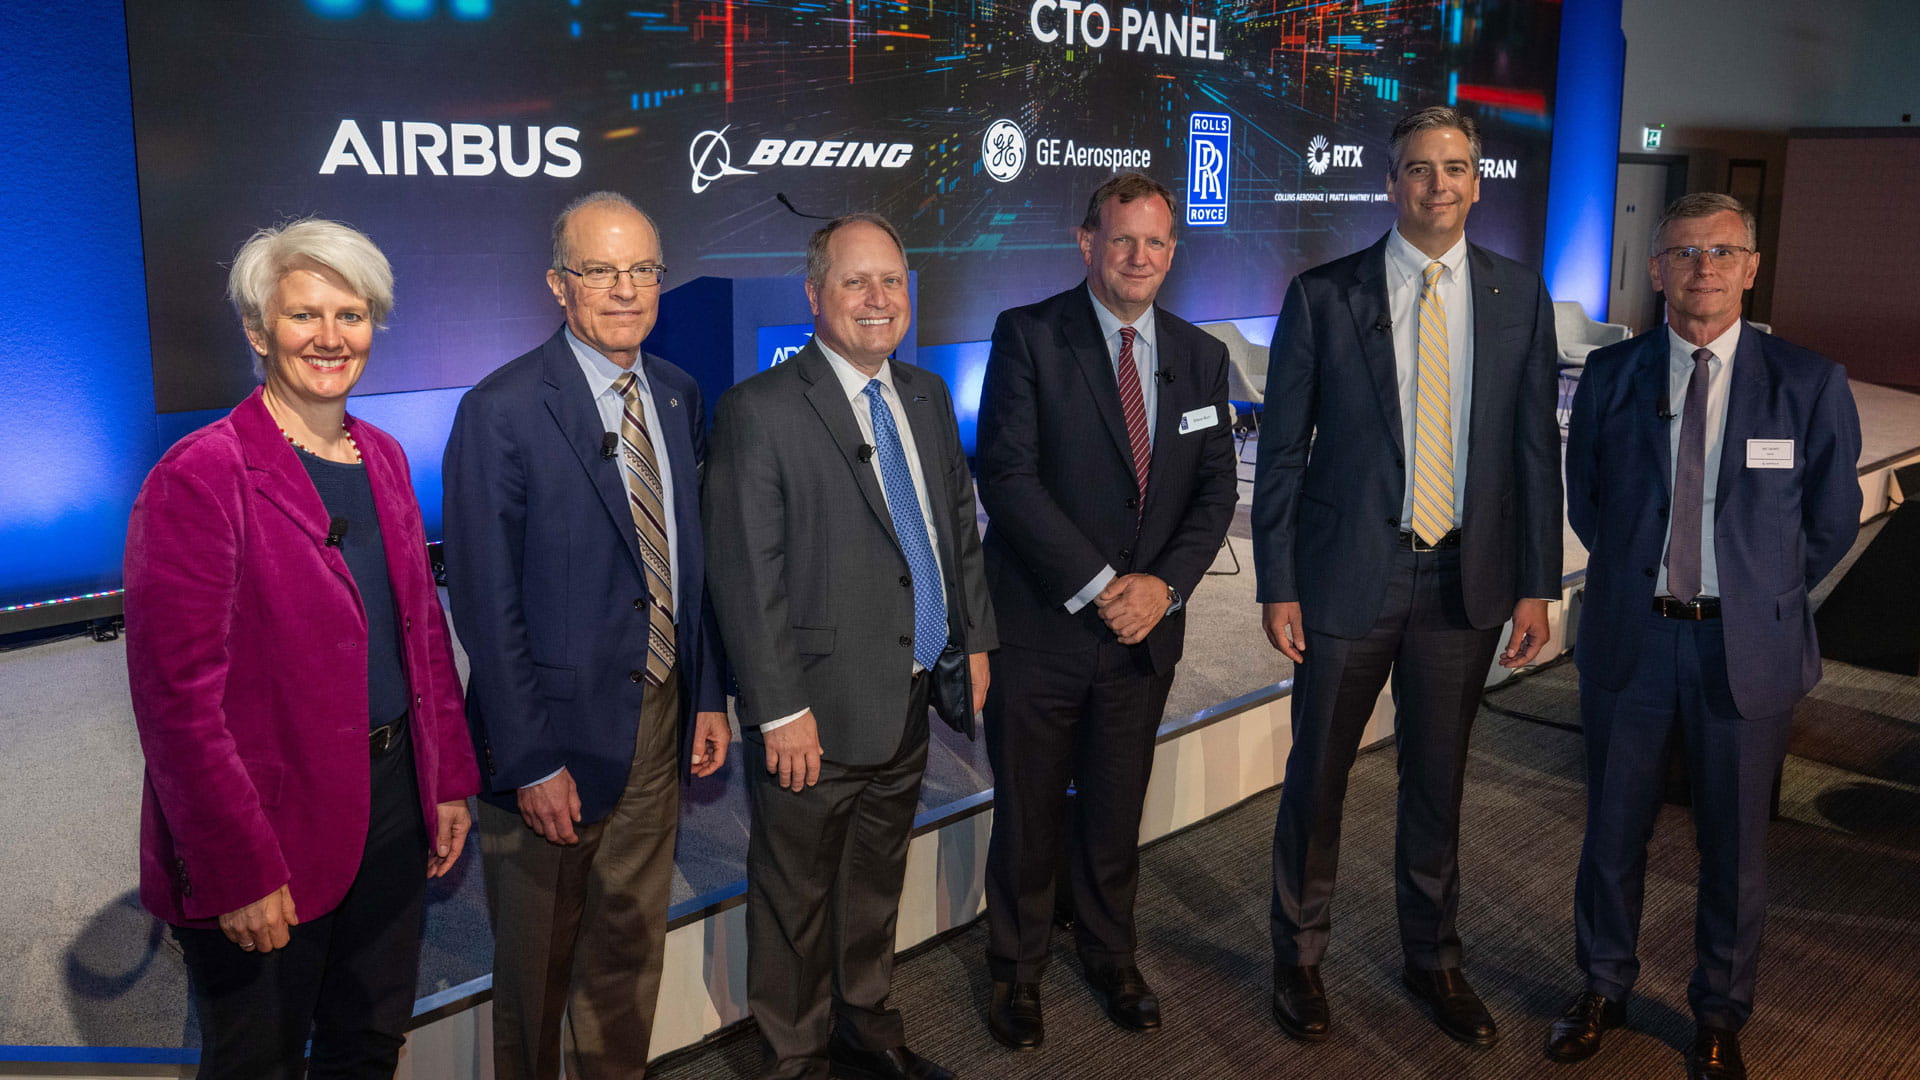 (left to right) Sabine Klauke, chief technology officer, Airbus; Todd Citron, chief technology officer, Boeing; Chris Lorence, chief engineer, GE Aerospace; Simon Burr, group director of Engineering, Technology and Safety, Rolls-Royce; Juan M. de Bedout, chief technology officer, RTX; and Eric Dalbiès, executive vice president, Strategy and chief technology officer, Safran. (Airbus photo)